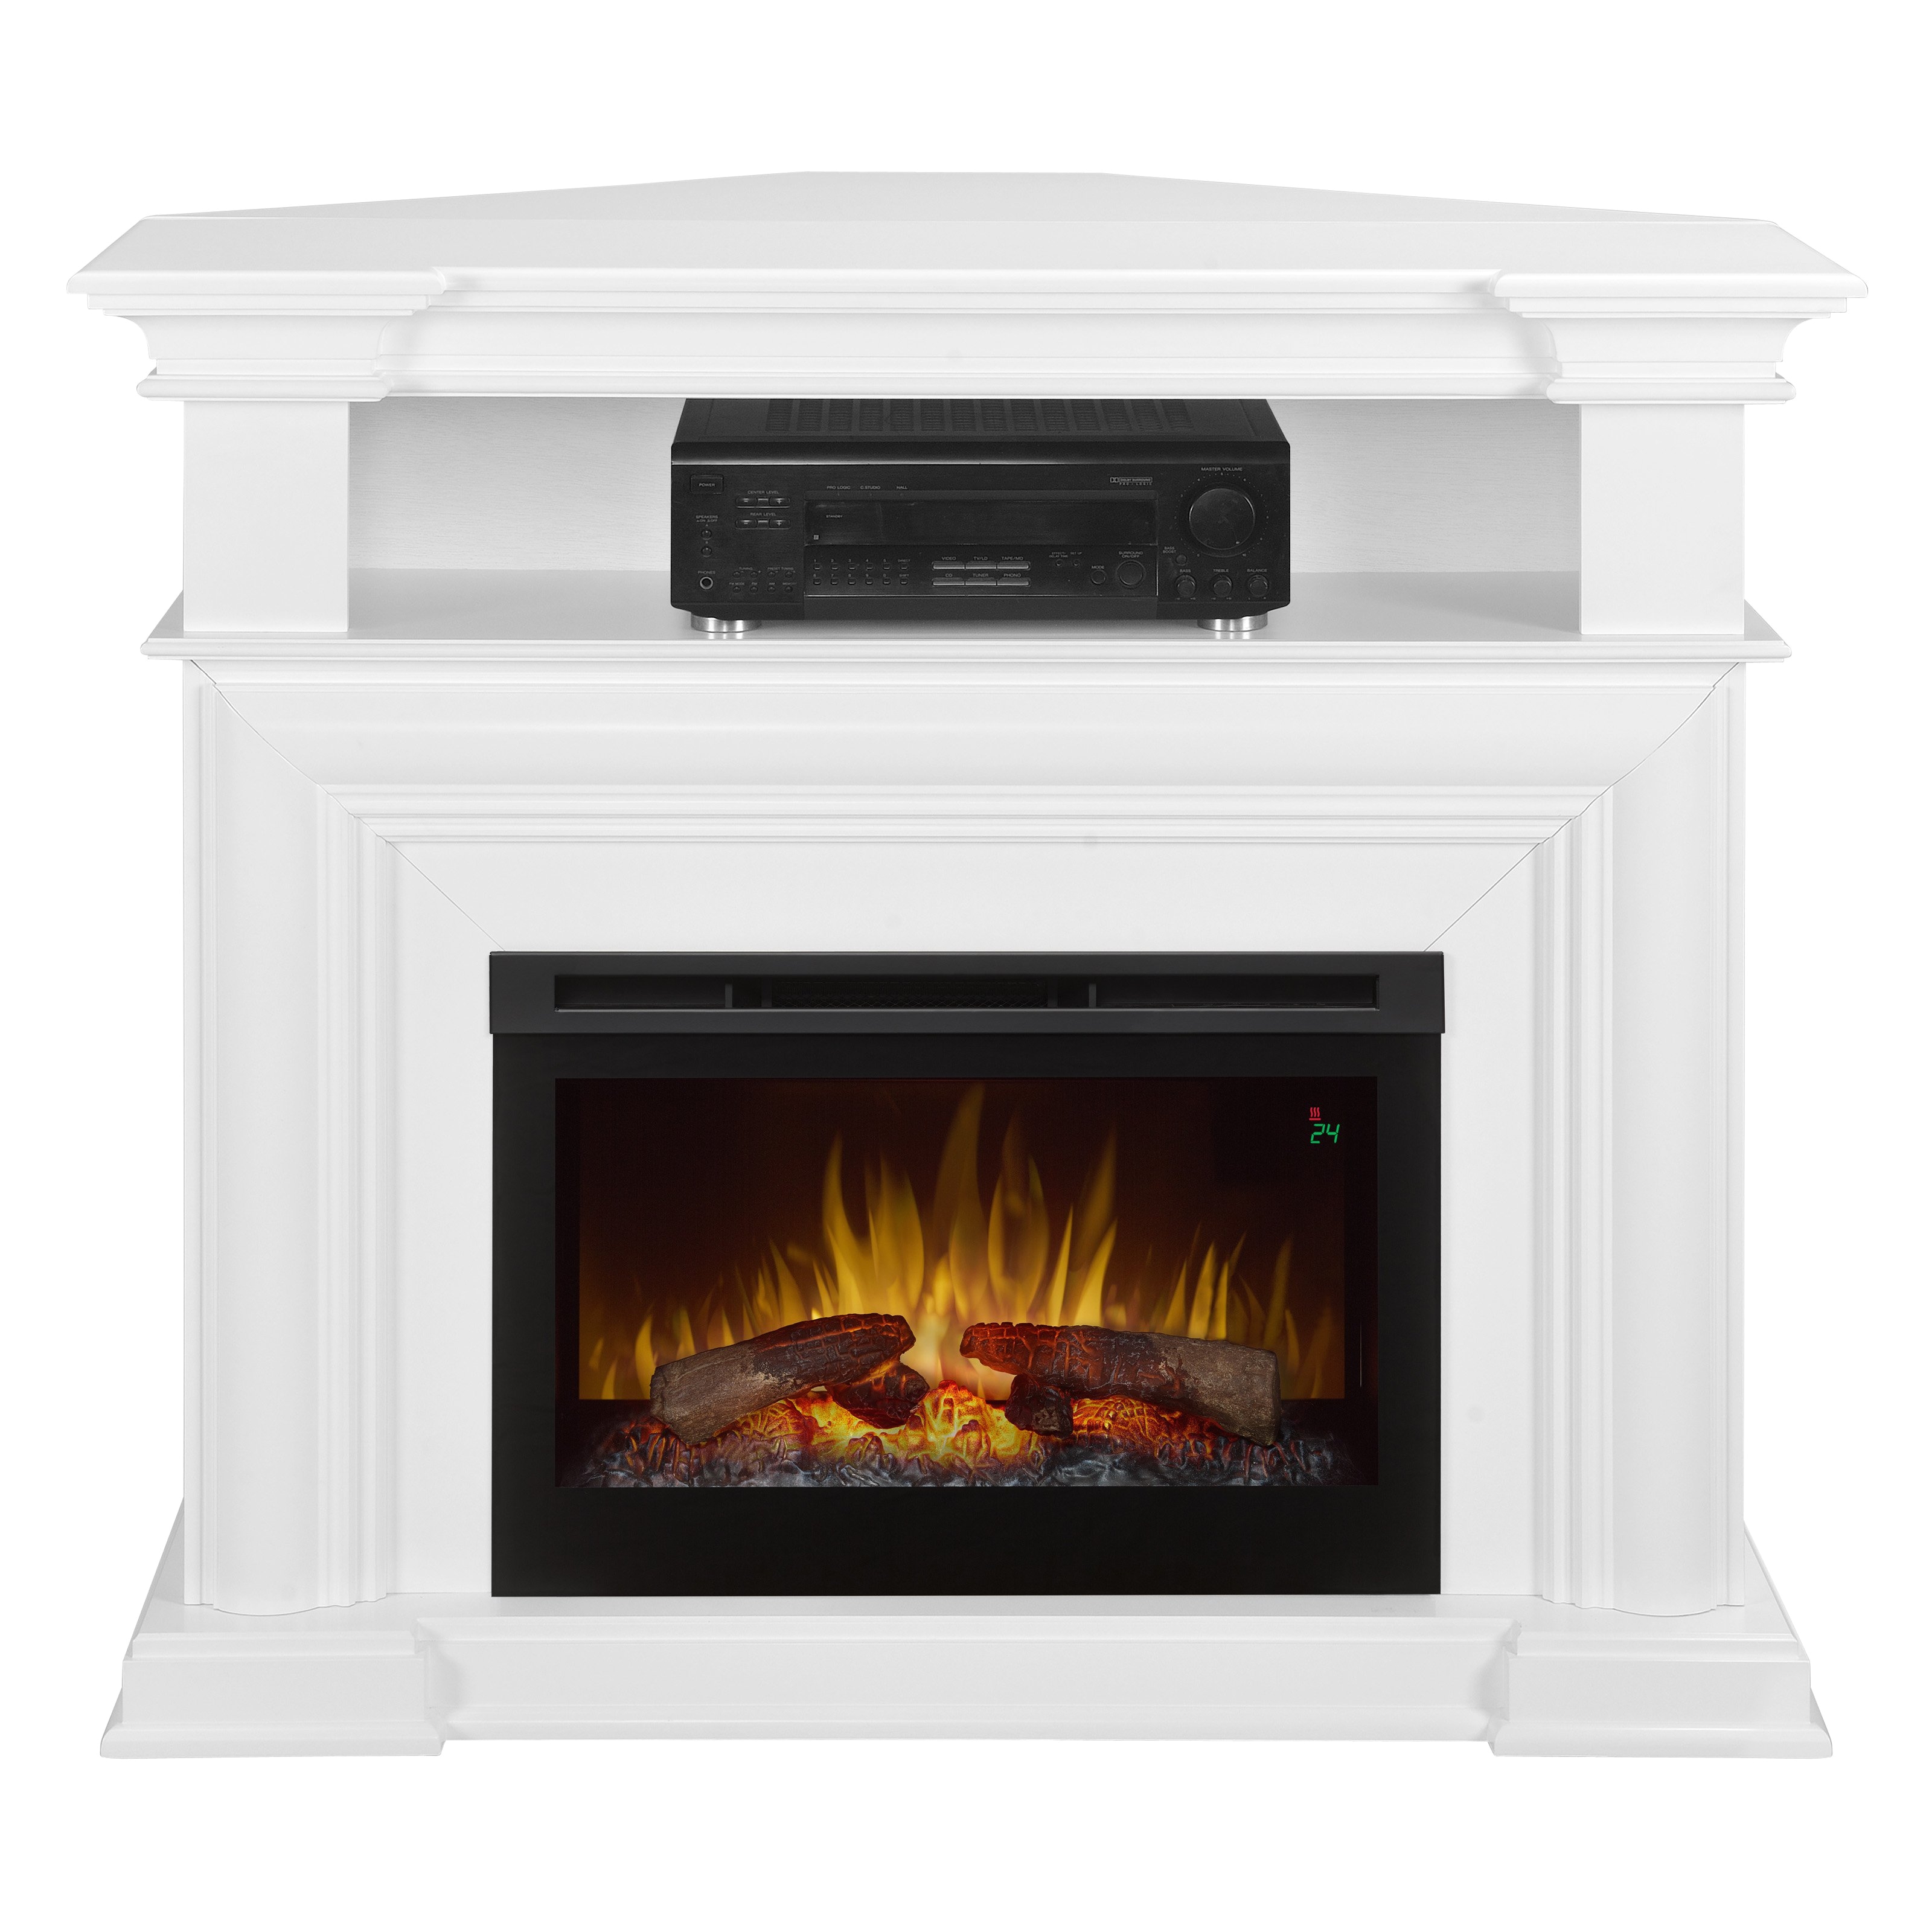 Wall Mount Electric Fireplace Insert Best Of Electric Log Inserts for Existing Fireplaces Natural Gas